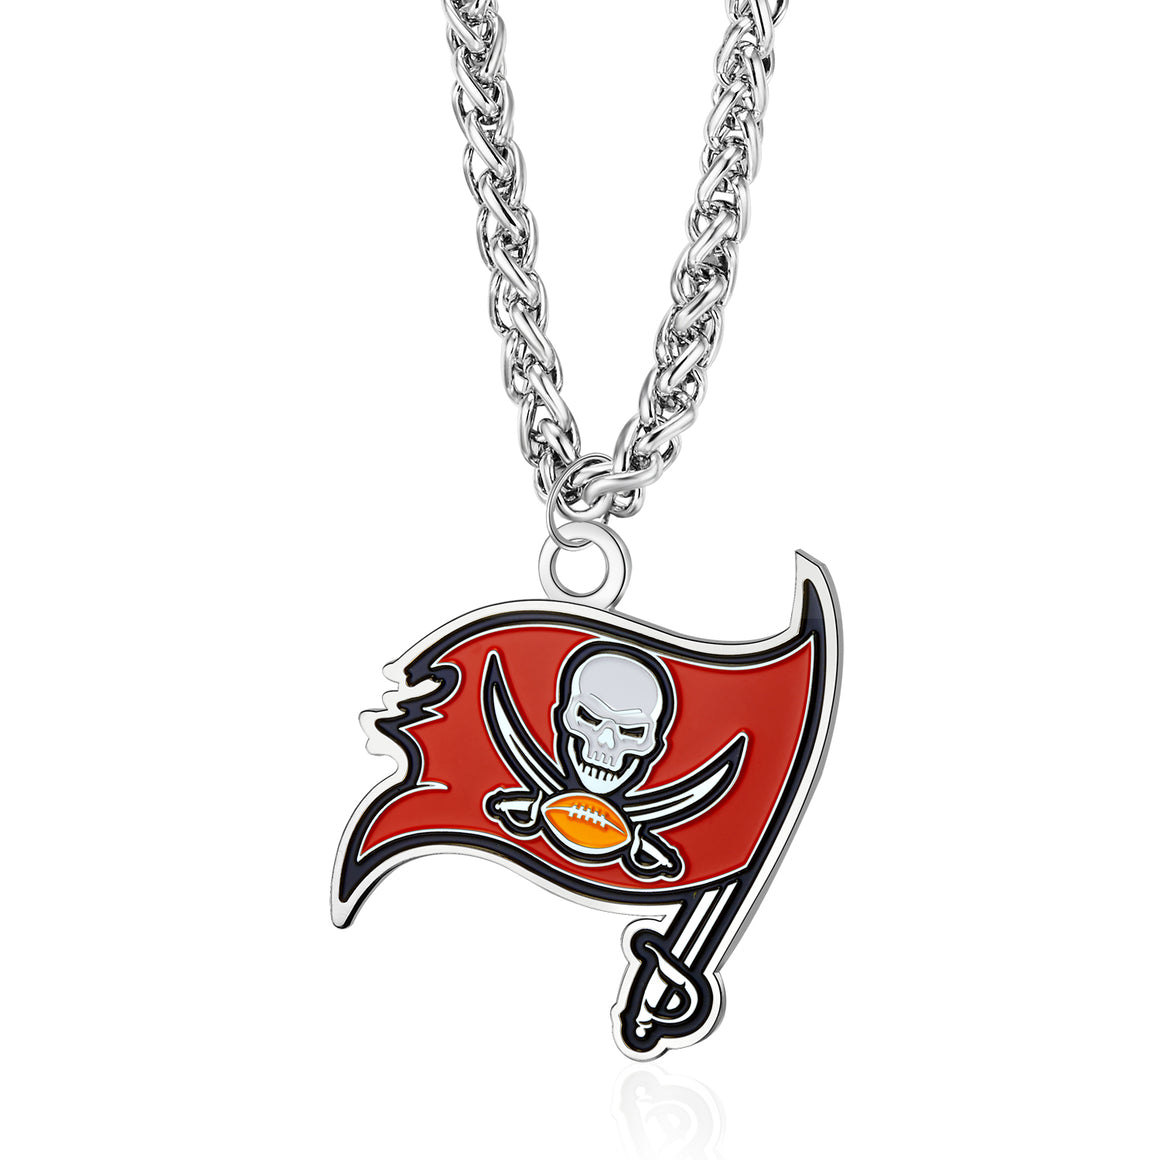 TAMPA BAY BUCCANEERS TEAM LOGO NECKLACE – JR'S SPORTS